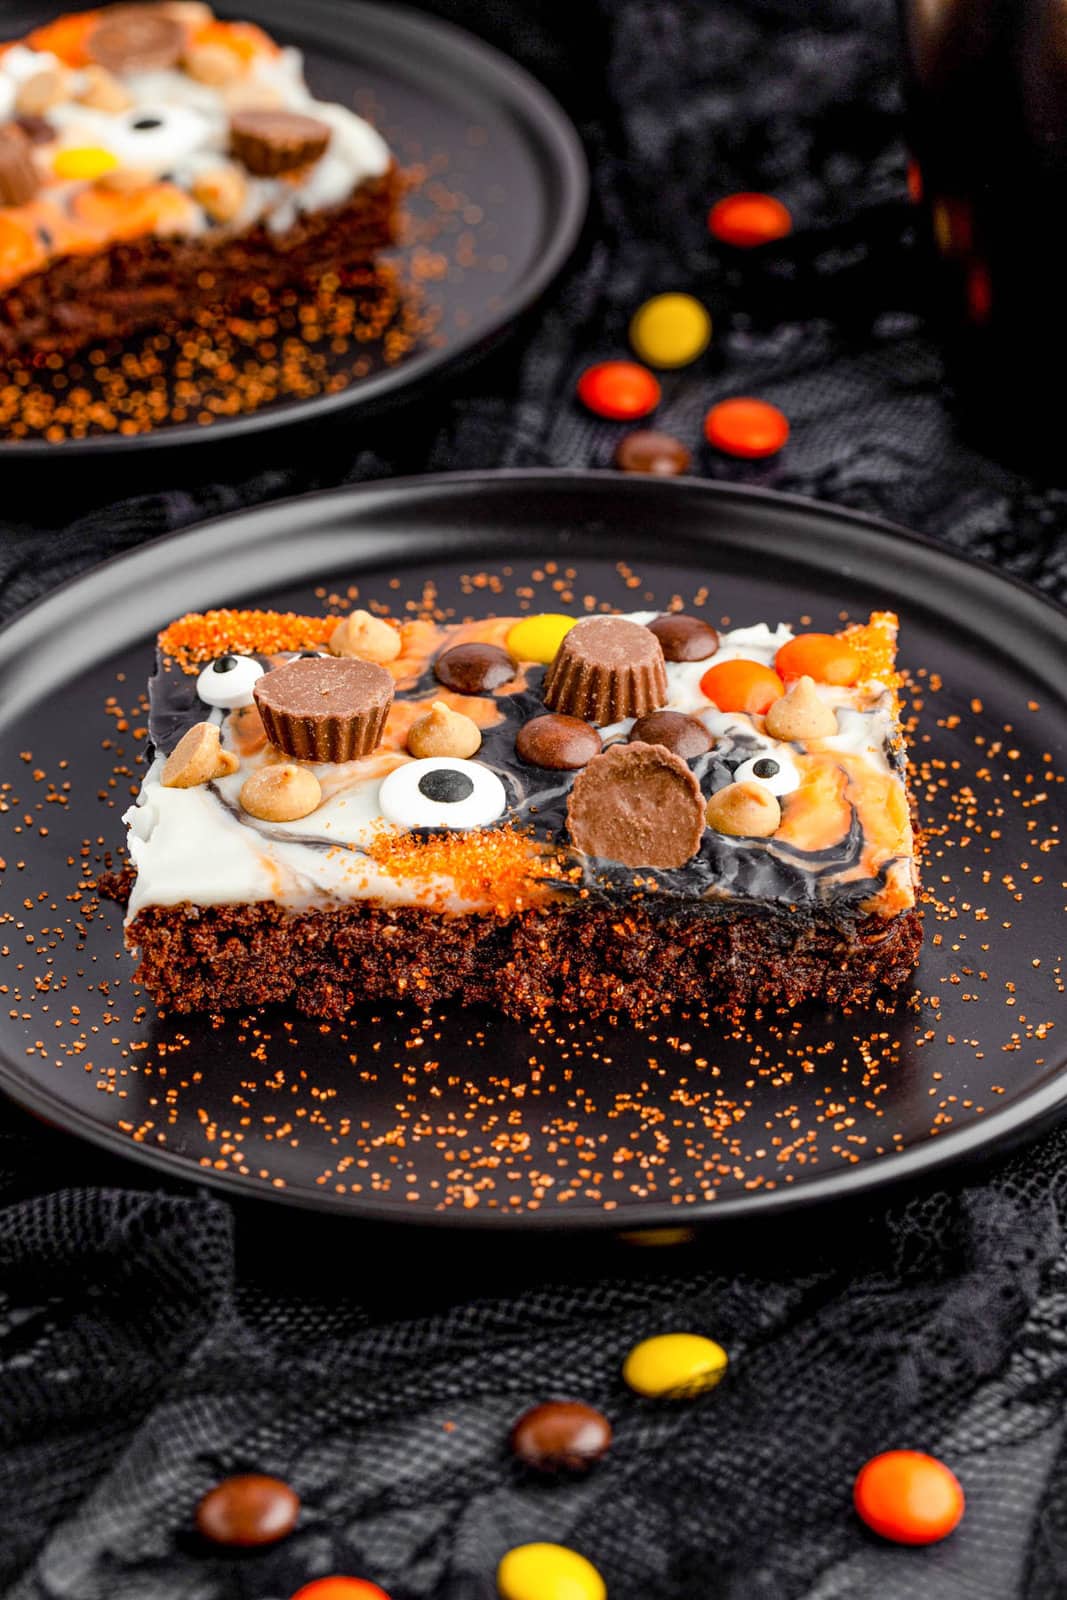 One of the cut Peanut Butter Halloween Brownies on black plate with orange sugar.